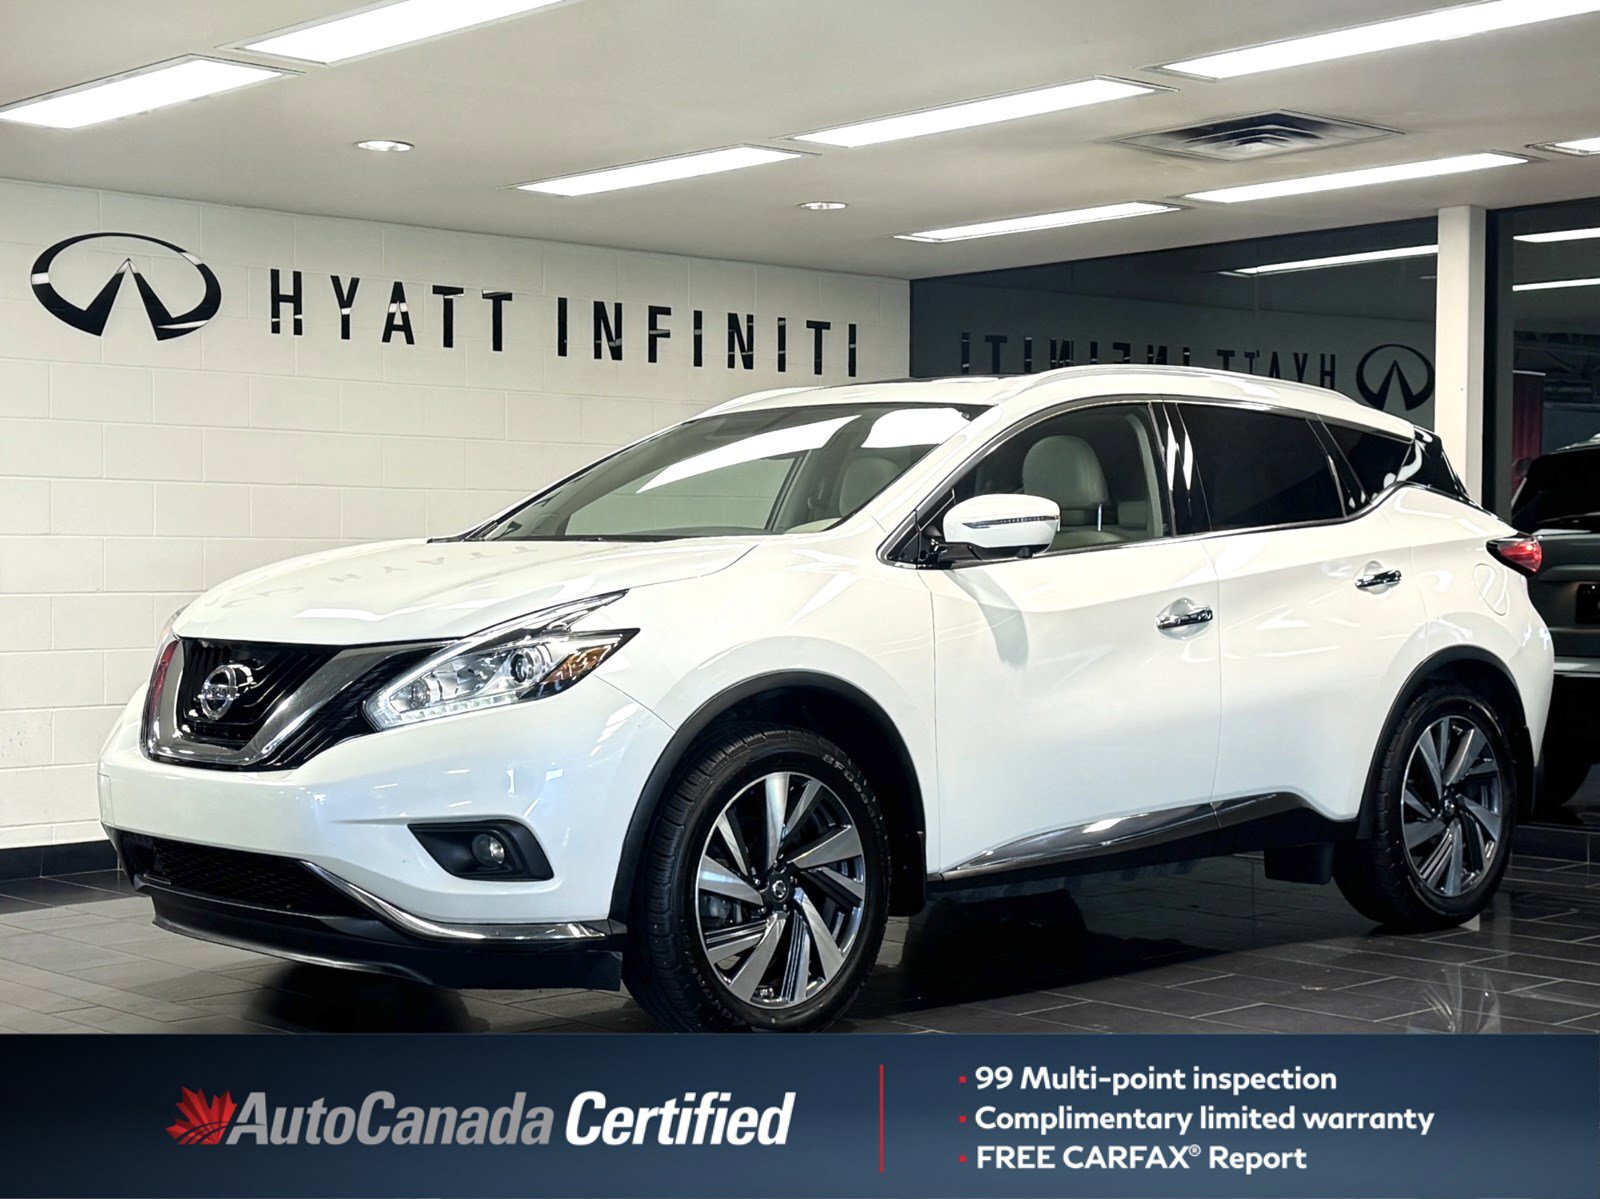 2018 Nissan Murano - No Accidents | Low Mileage | Hands-free Liftgate